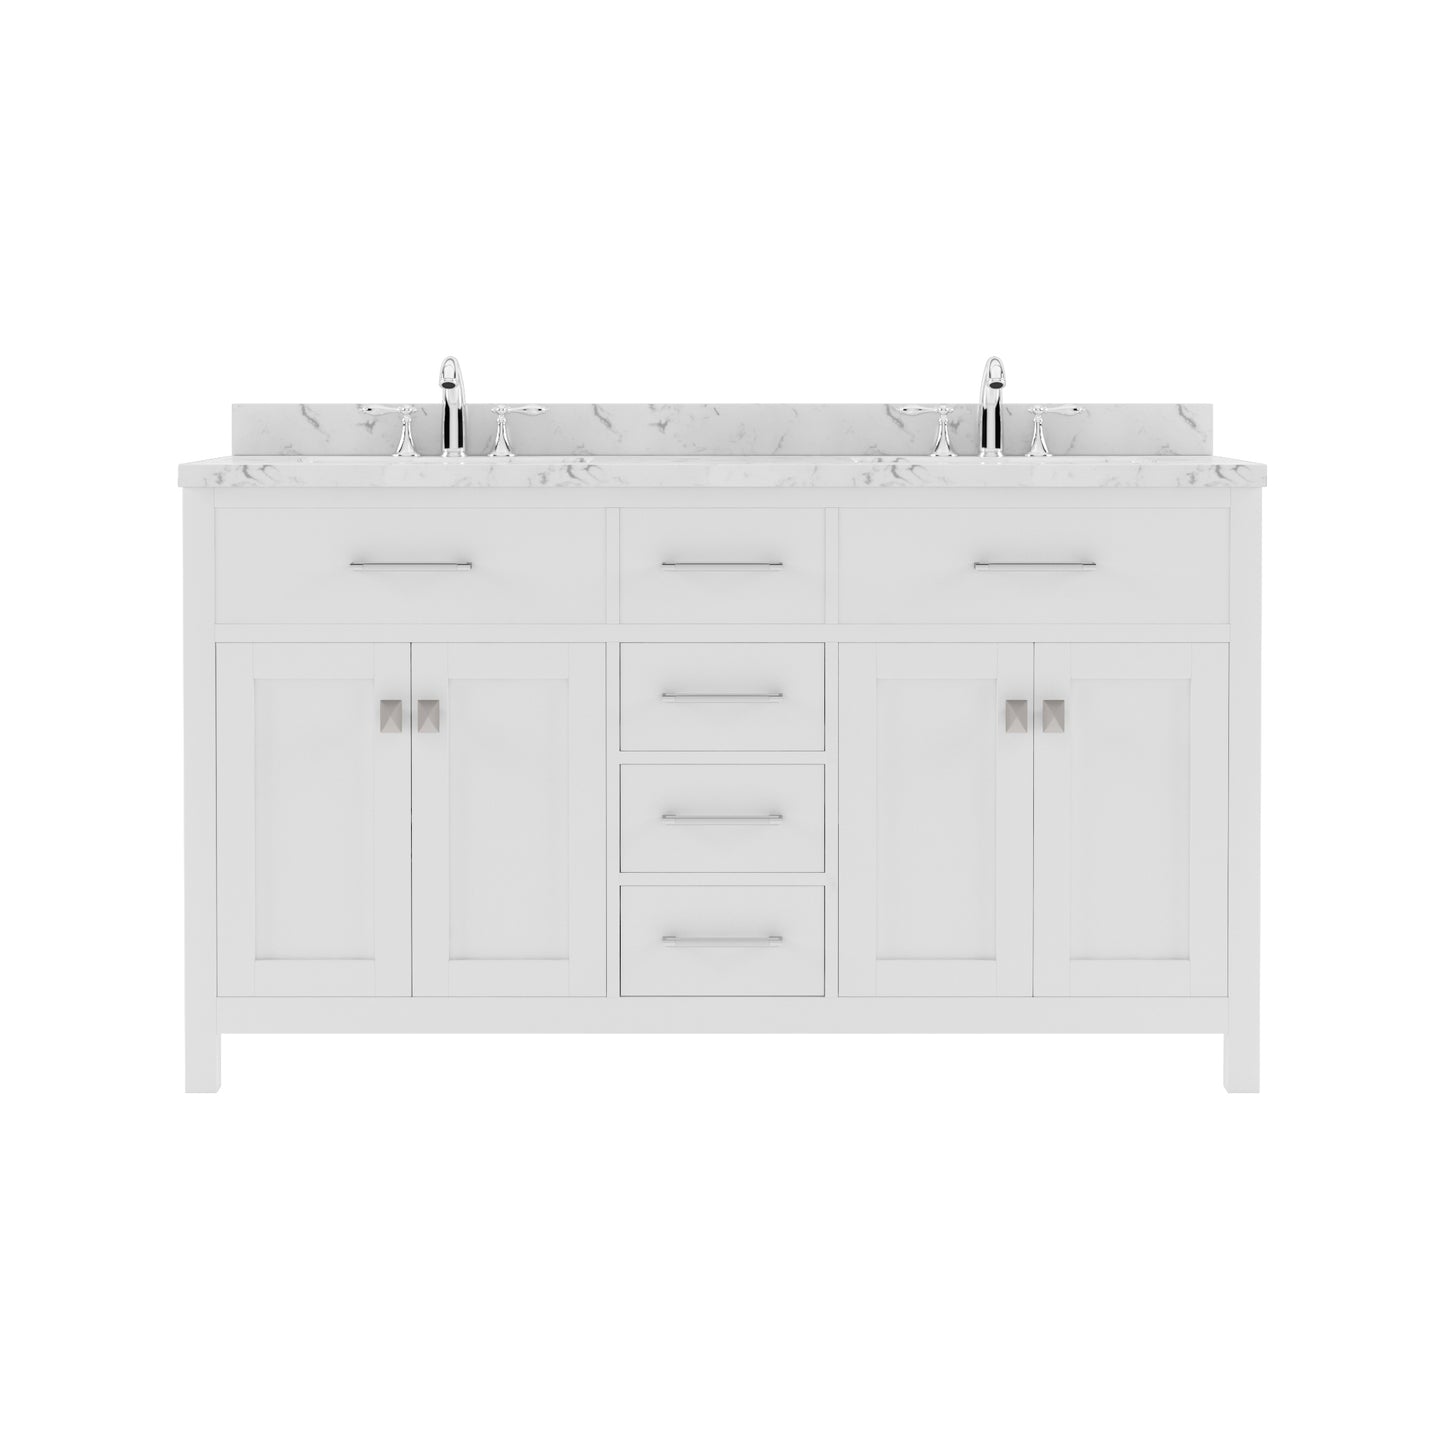 Virtu USA Caroline 60" Double Bath Vanity in Cashmere Gray with White Quartz Top and Square Sinks with Polished Chrome Faucets with Matching Mirror - Luxe Bathroom Vanities